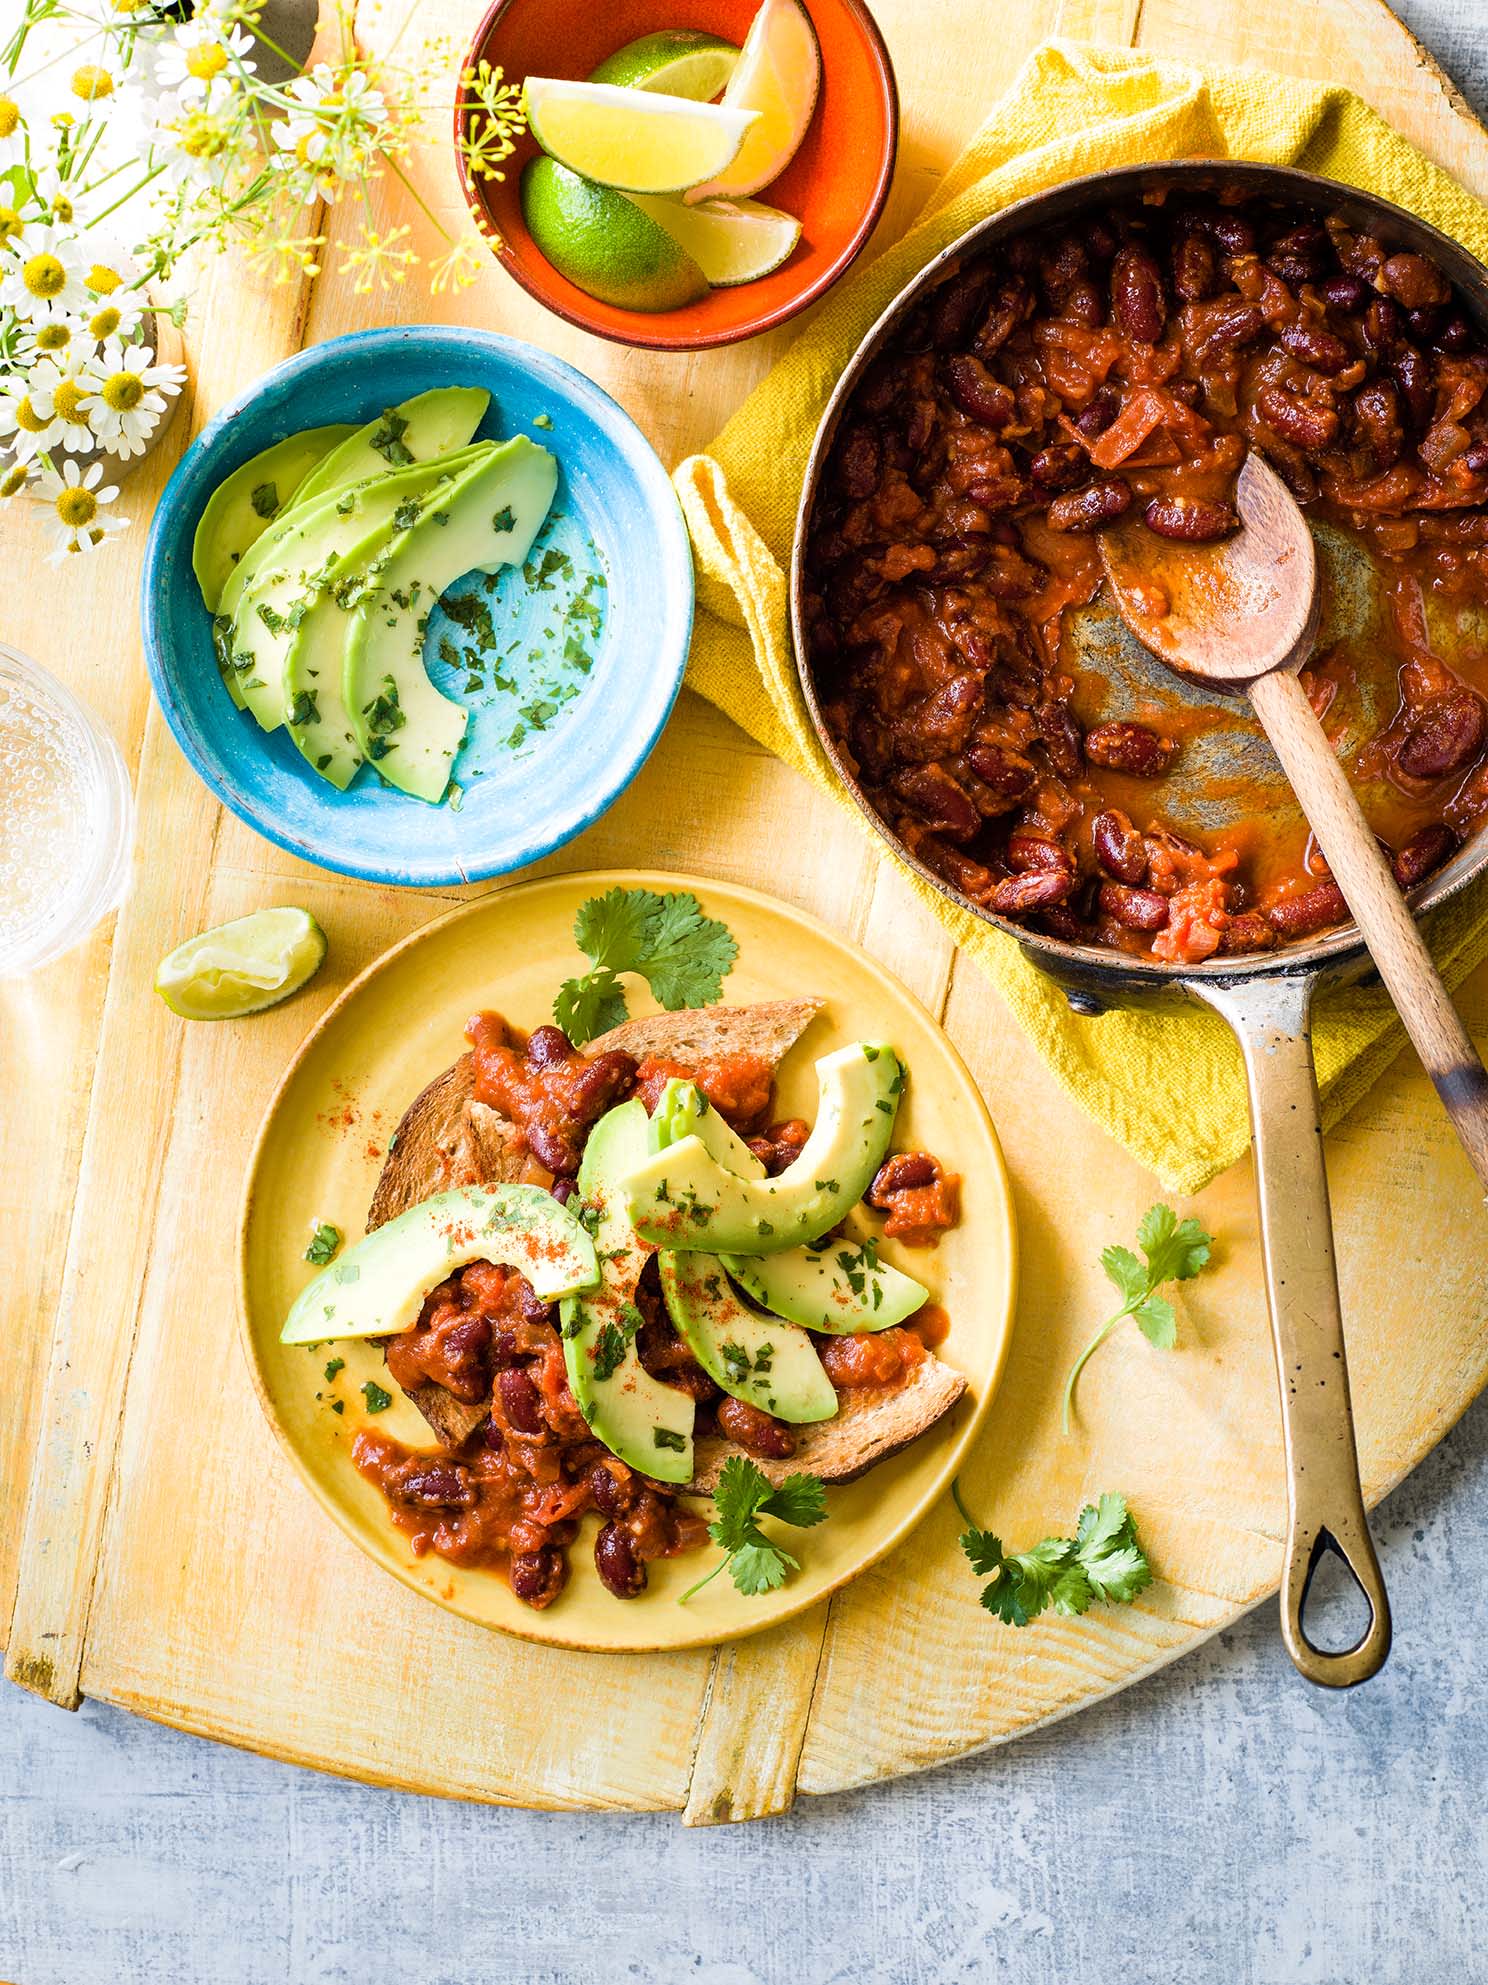 Photo of Spicy Mexican beans & avocado on toast by WW